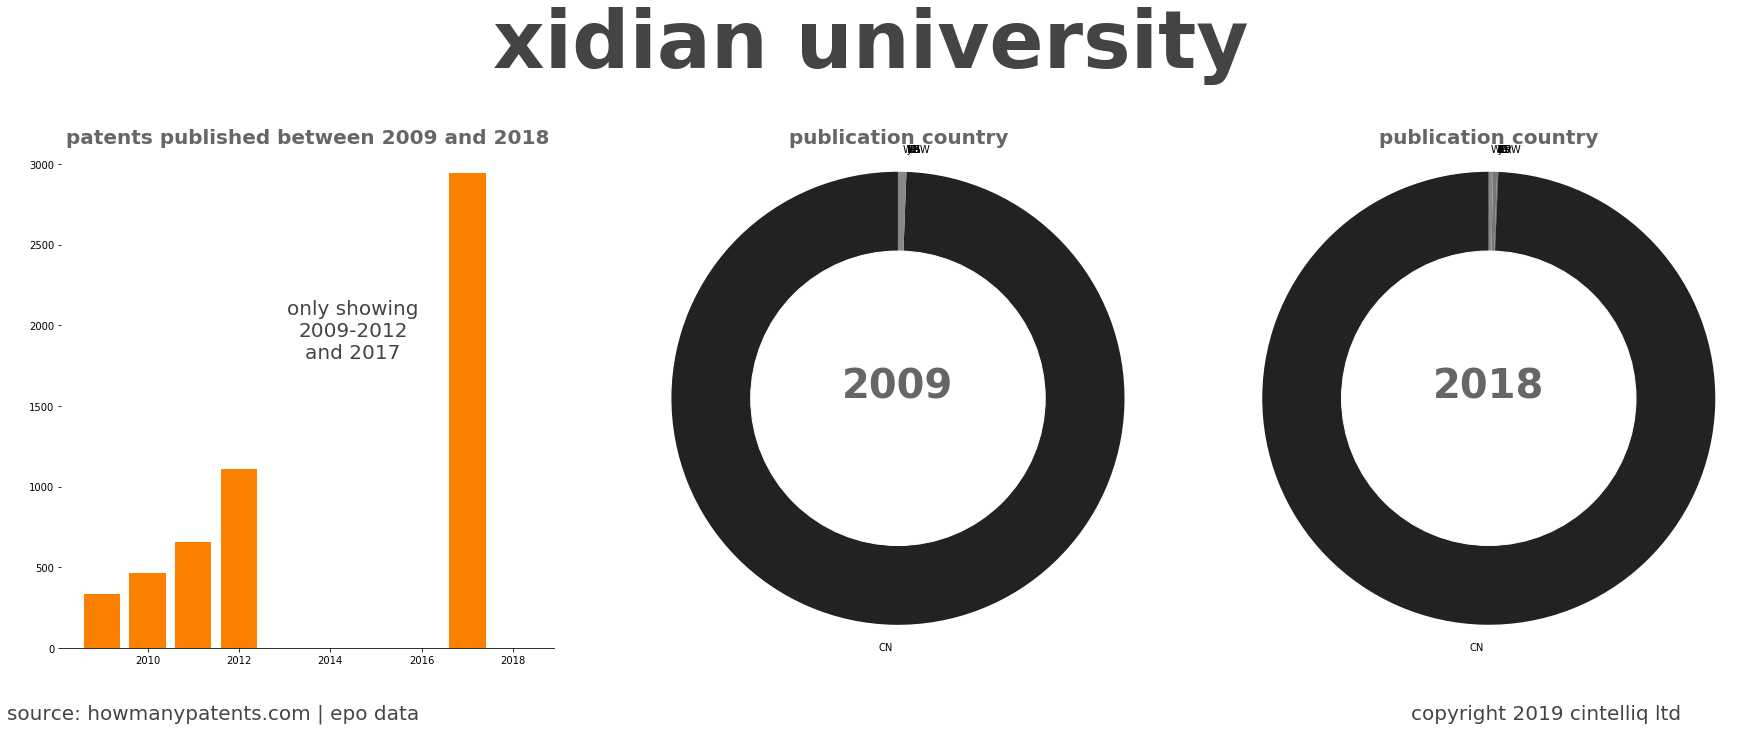 summary of patents for Xidian University